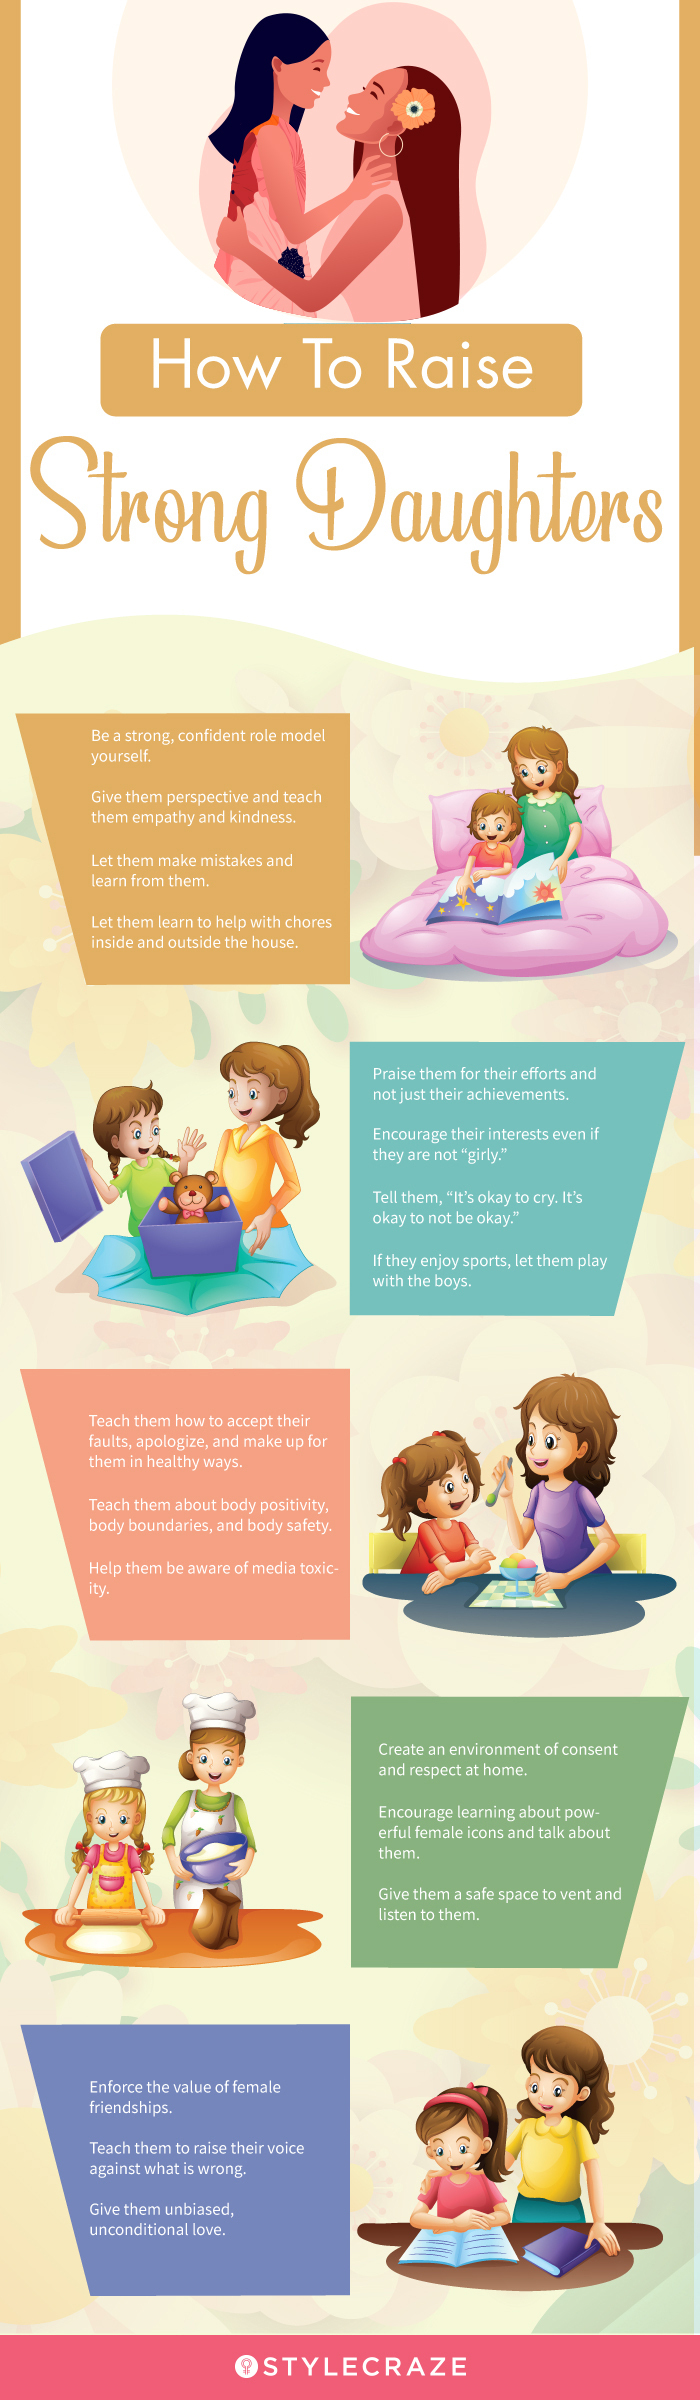 how to raise strong daughters [infographic]